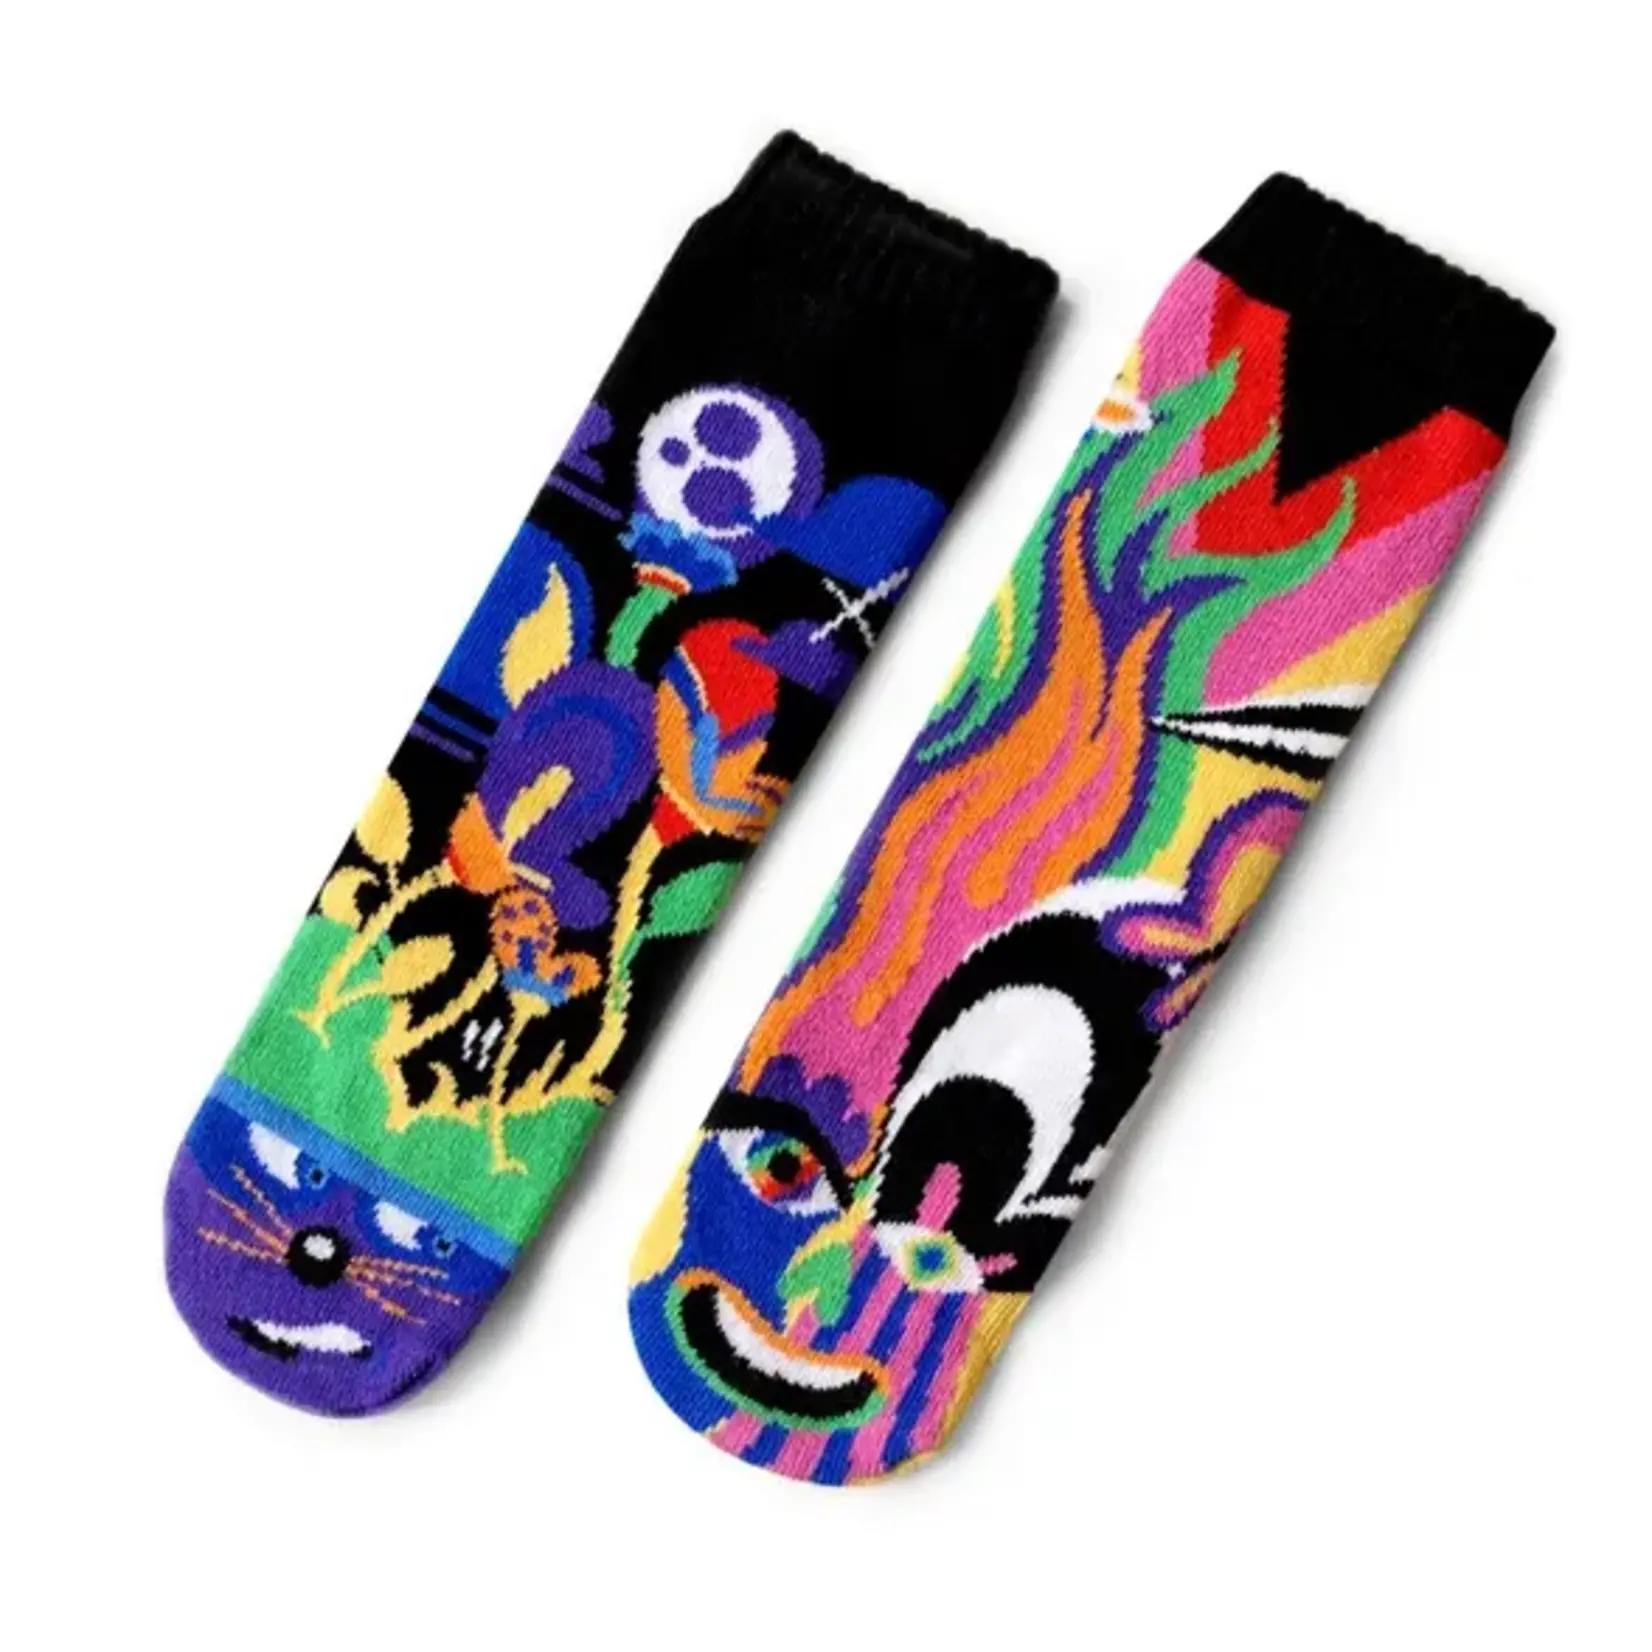 Pals Socks - Shy & Outgoing, Ages 9-12